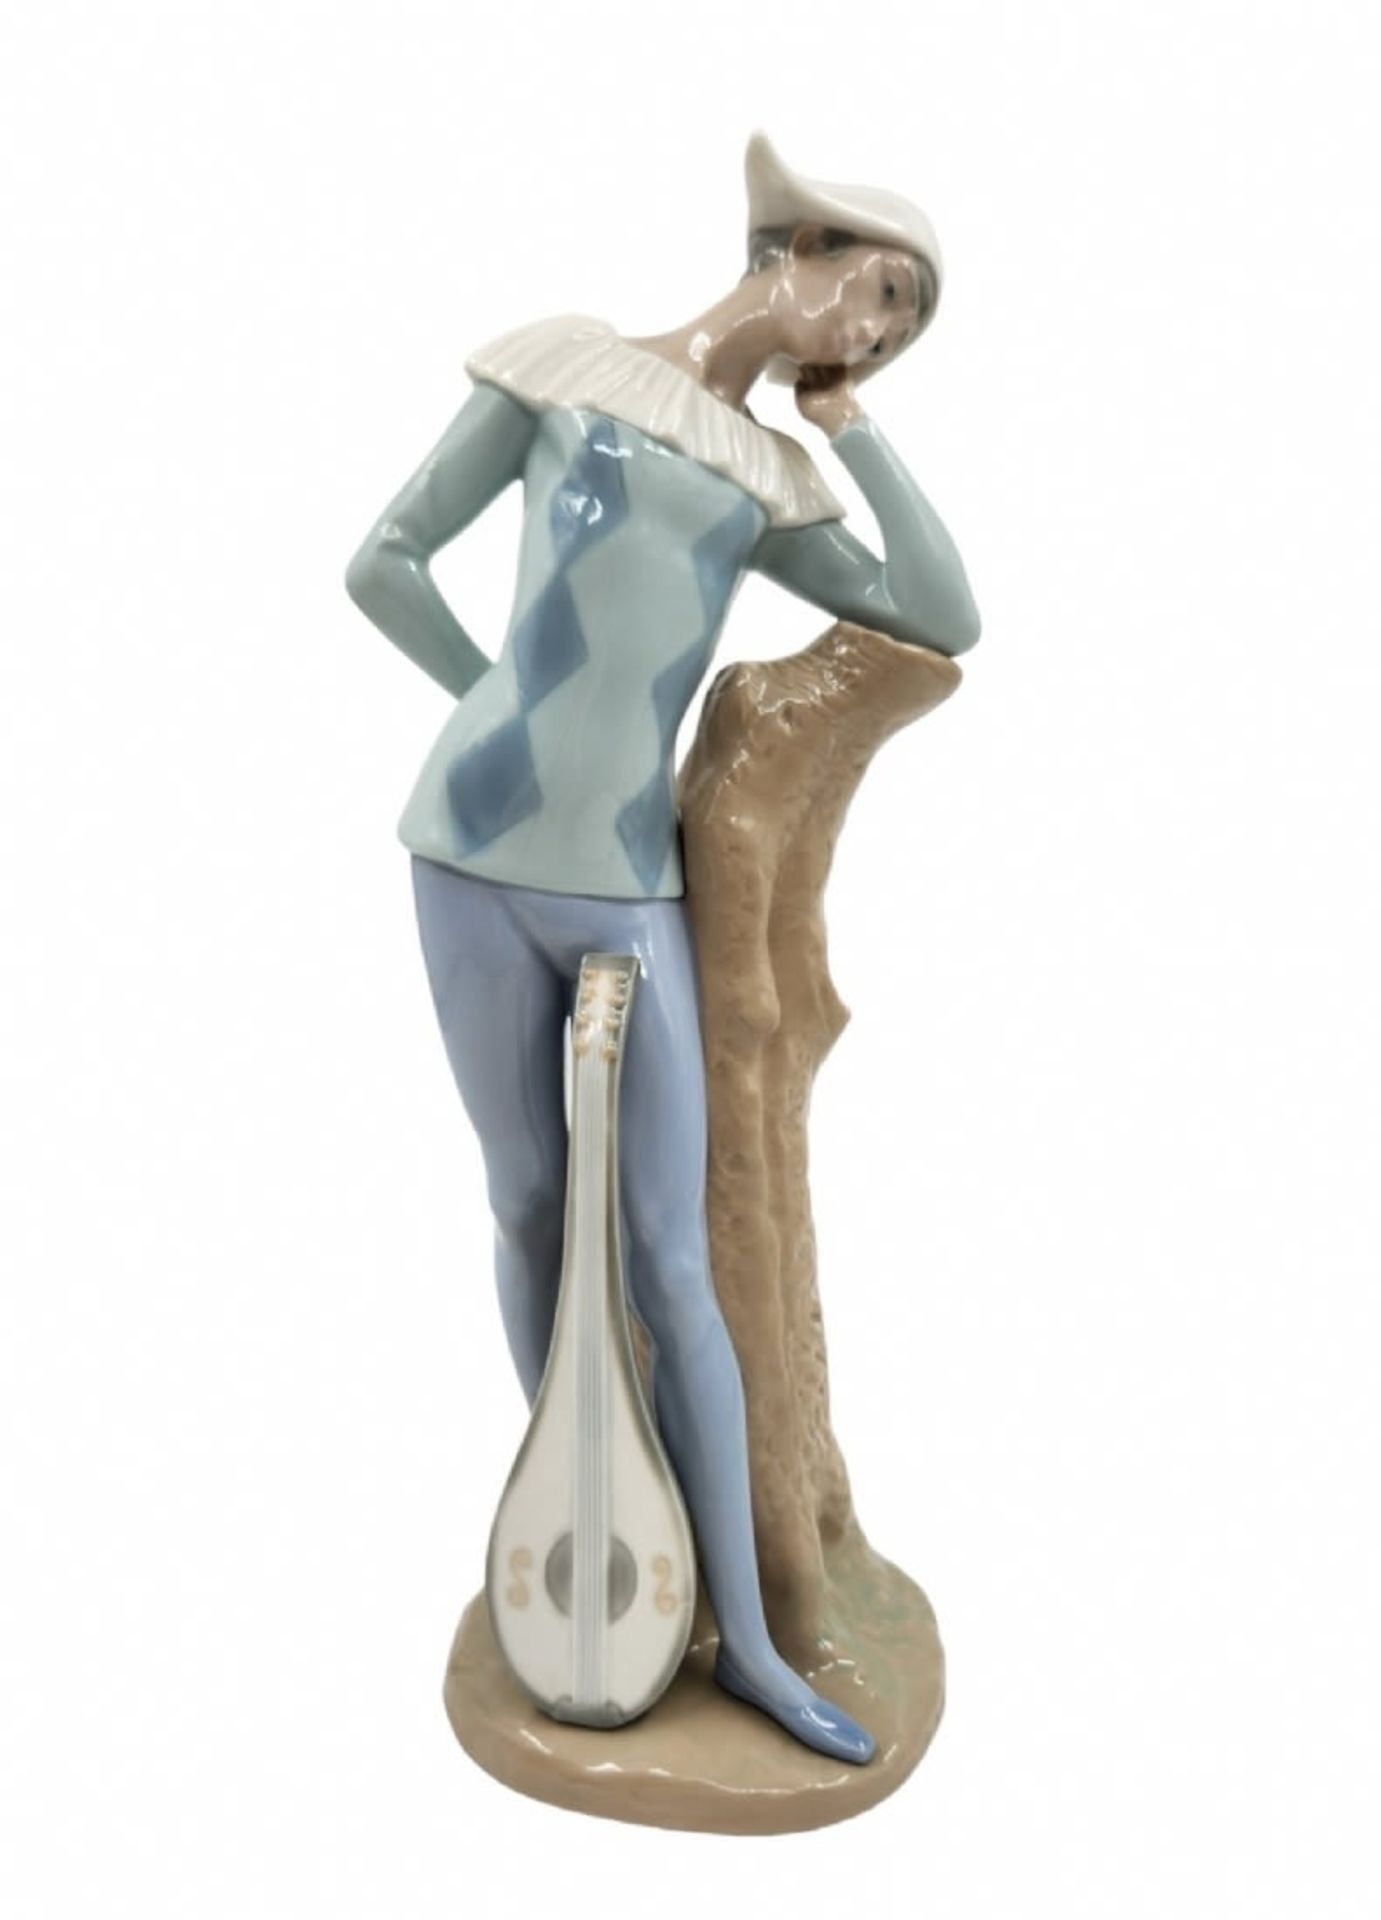 Spanish porcelain figurine made by: 'NAO' (from Lladro workshop), in the form of Harlequin,